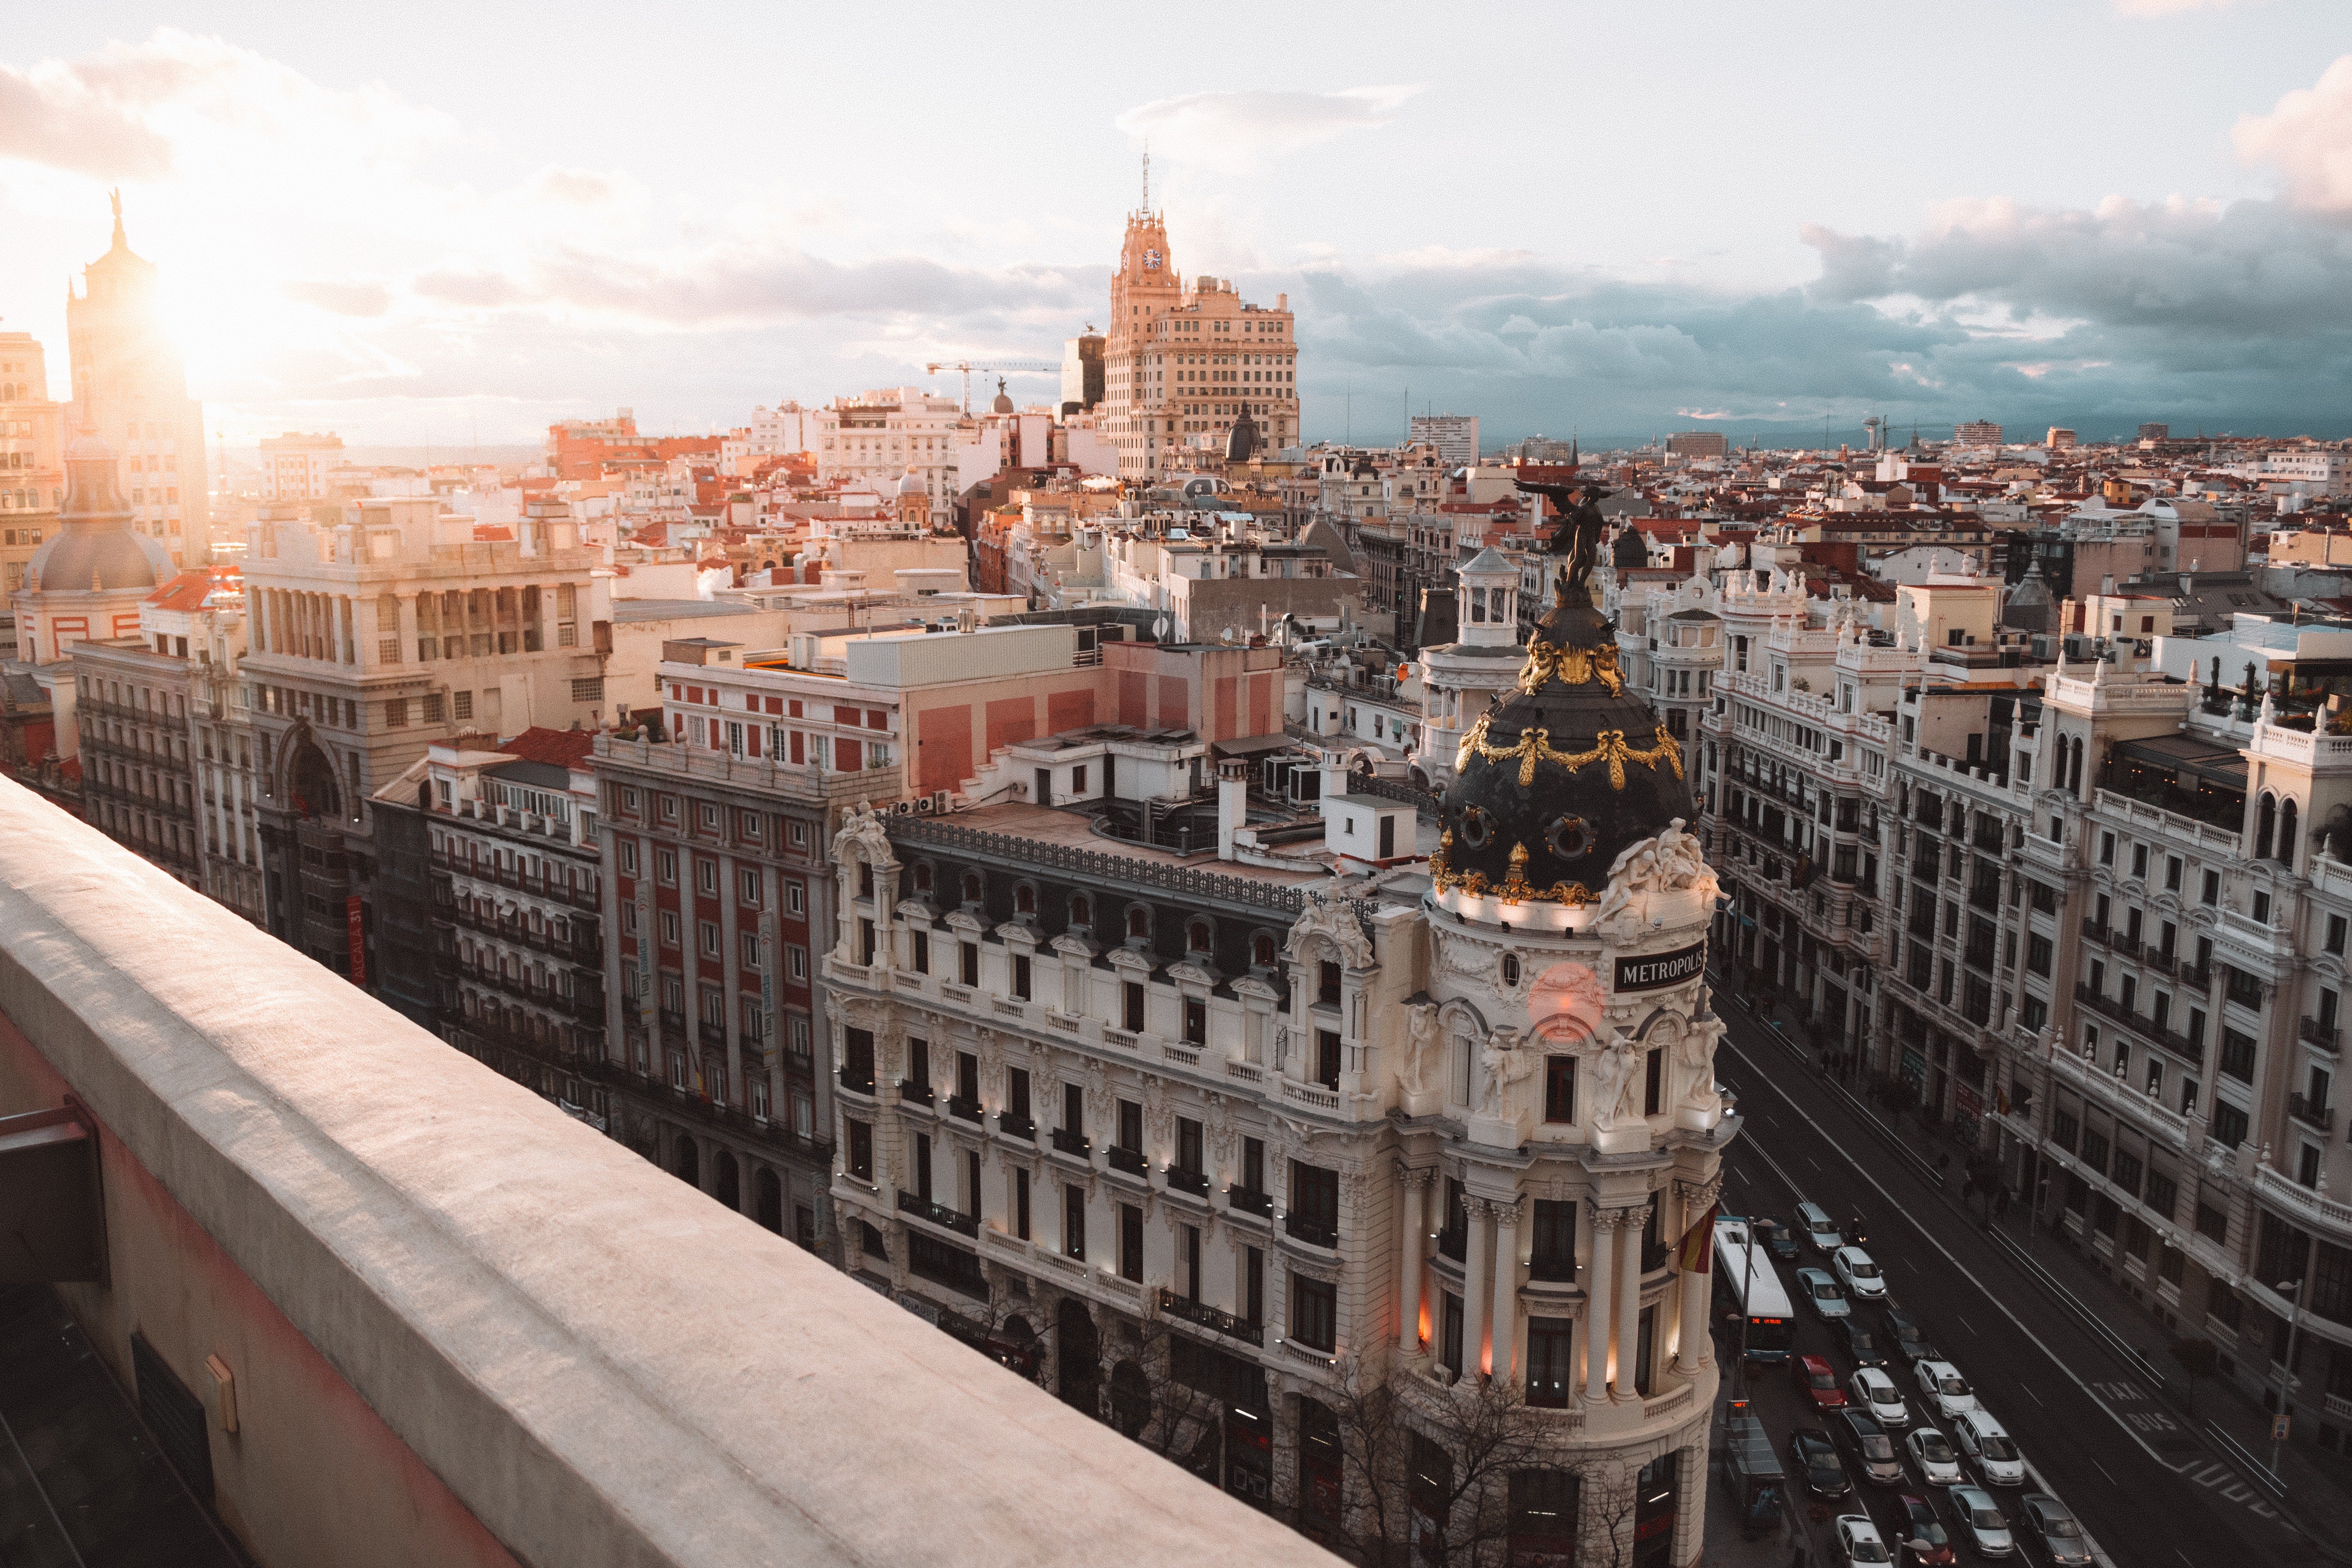 The group of friends toured Spain before heading back home. | Photo: Pexels